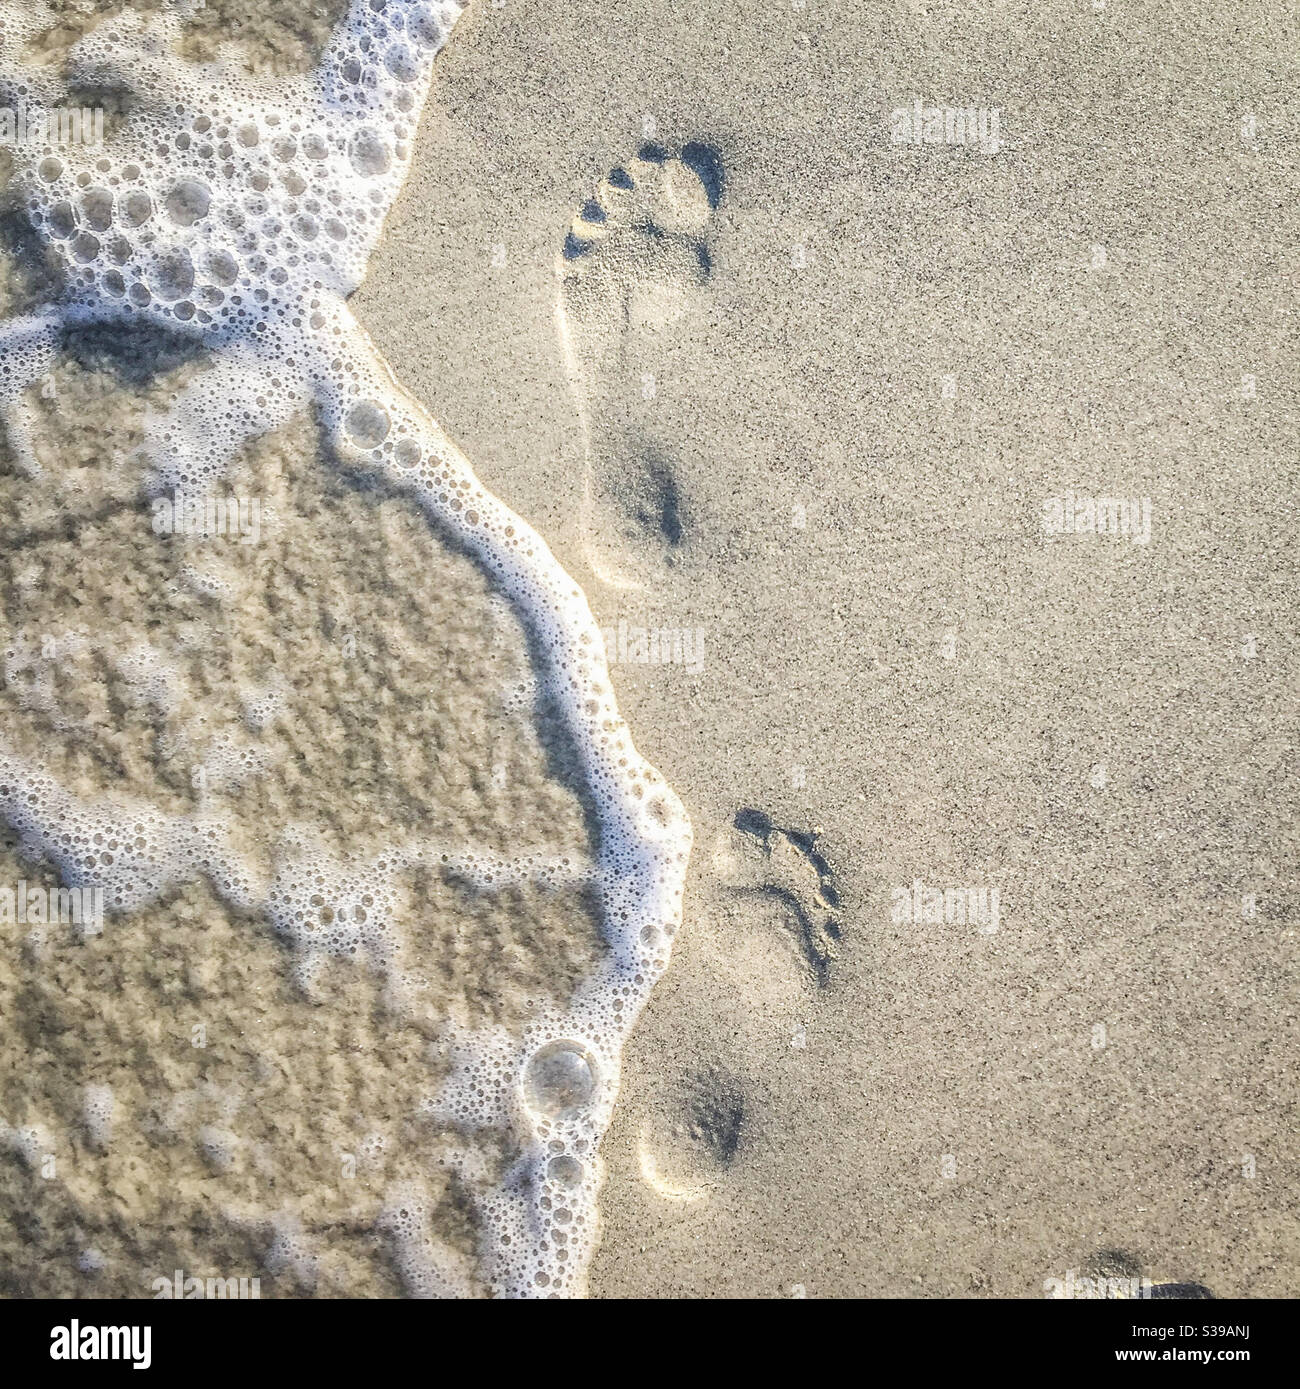 Two footprints in the sand on a beach Stock Photo